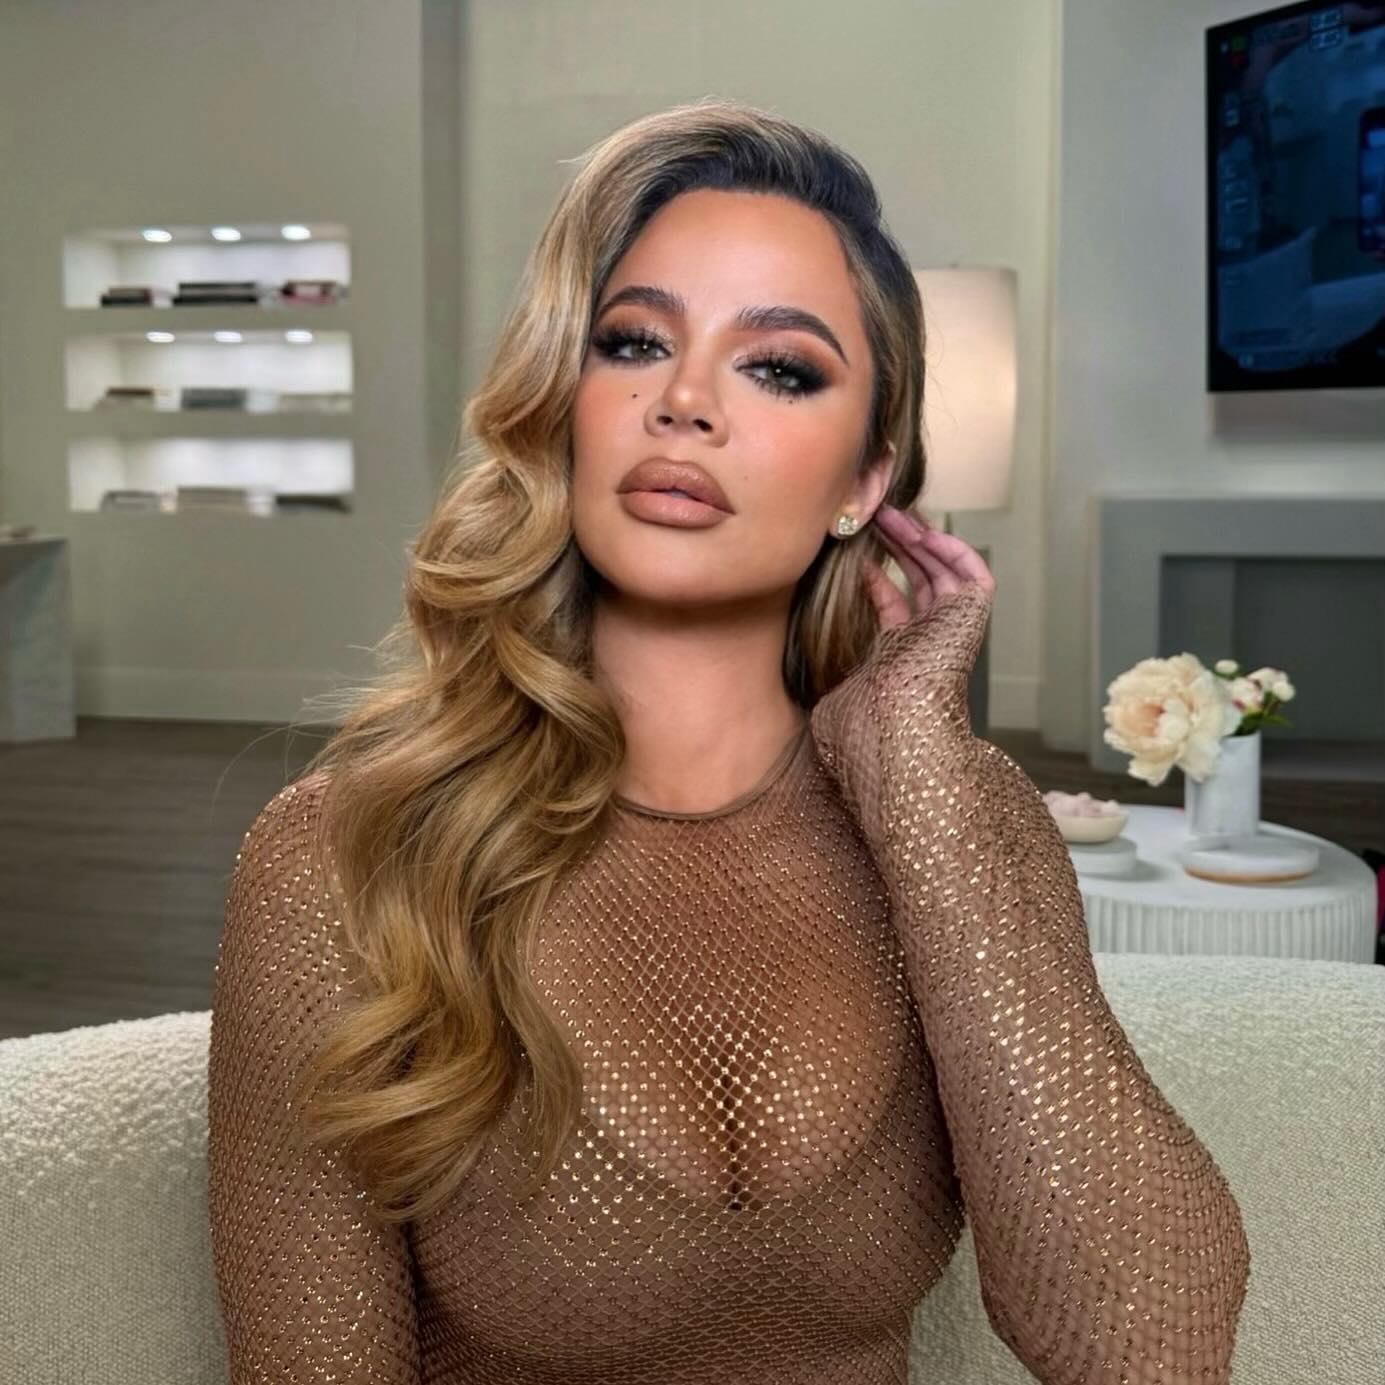 Khloe revealed she has begun working on herself since Tristan was suspended by the NBA for violating the league's banned substance policy